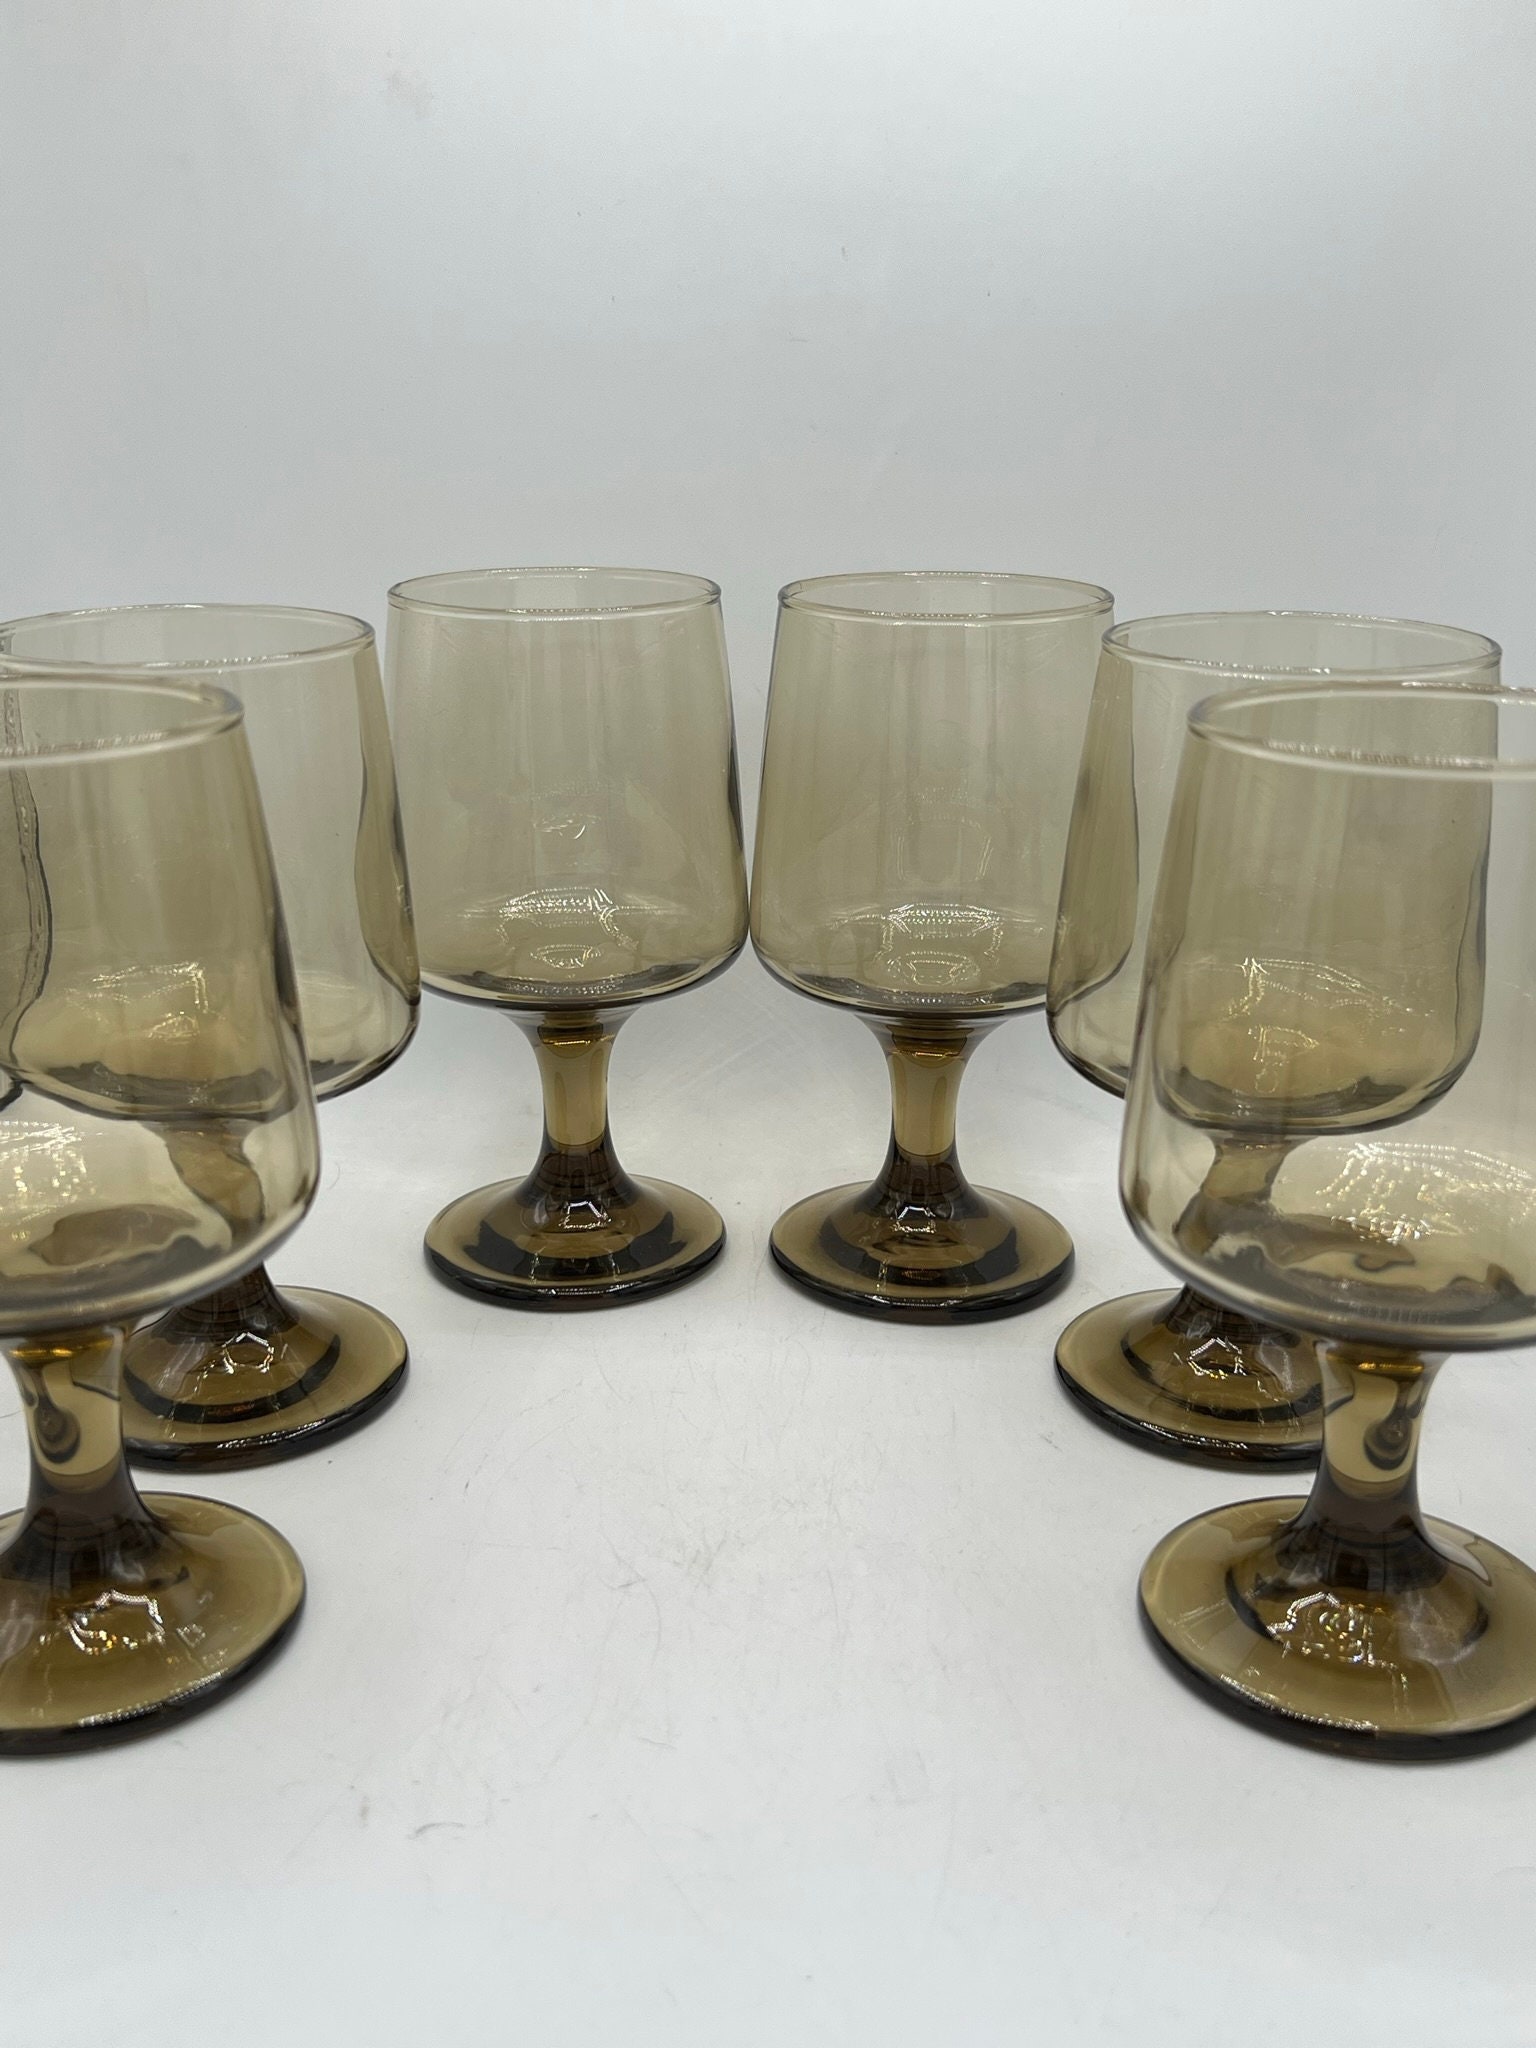 1970s Libbey Tawny Accent Champagne or Sherbet Glasses, Set of 8 - Ruby Lane